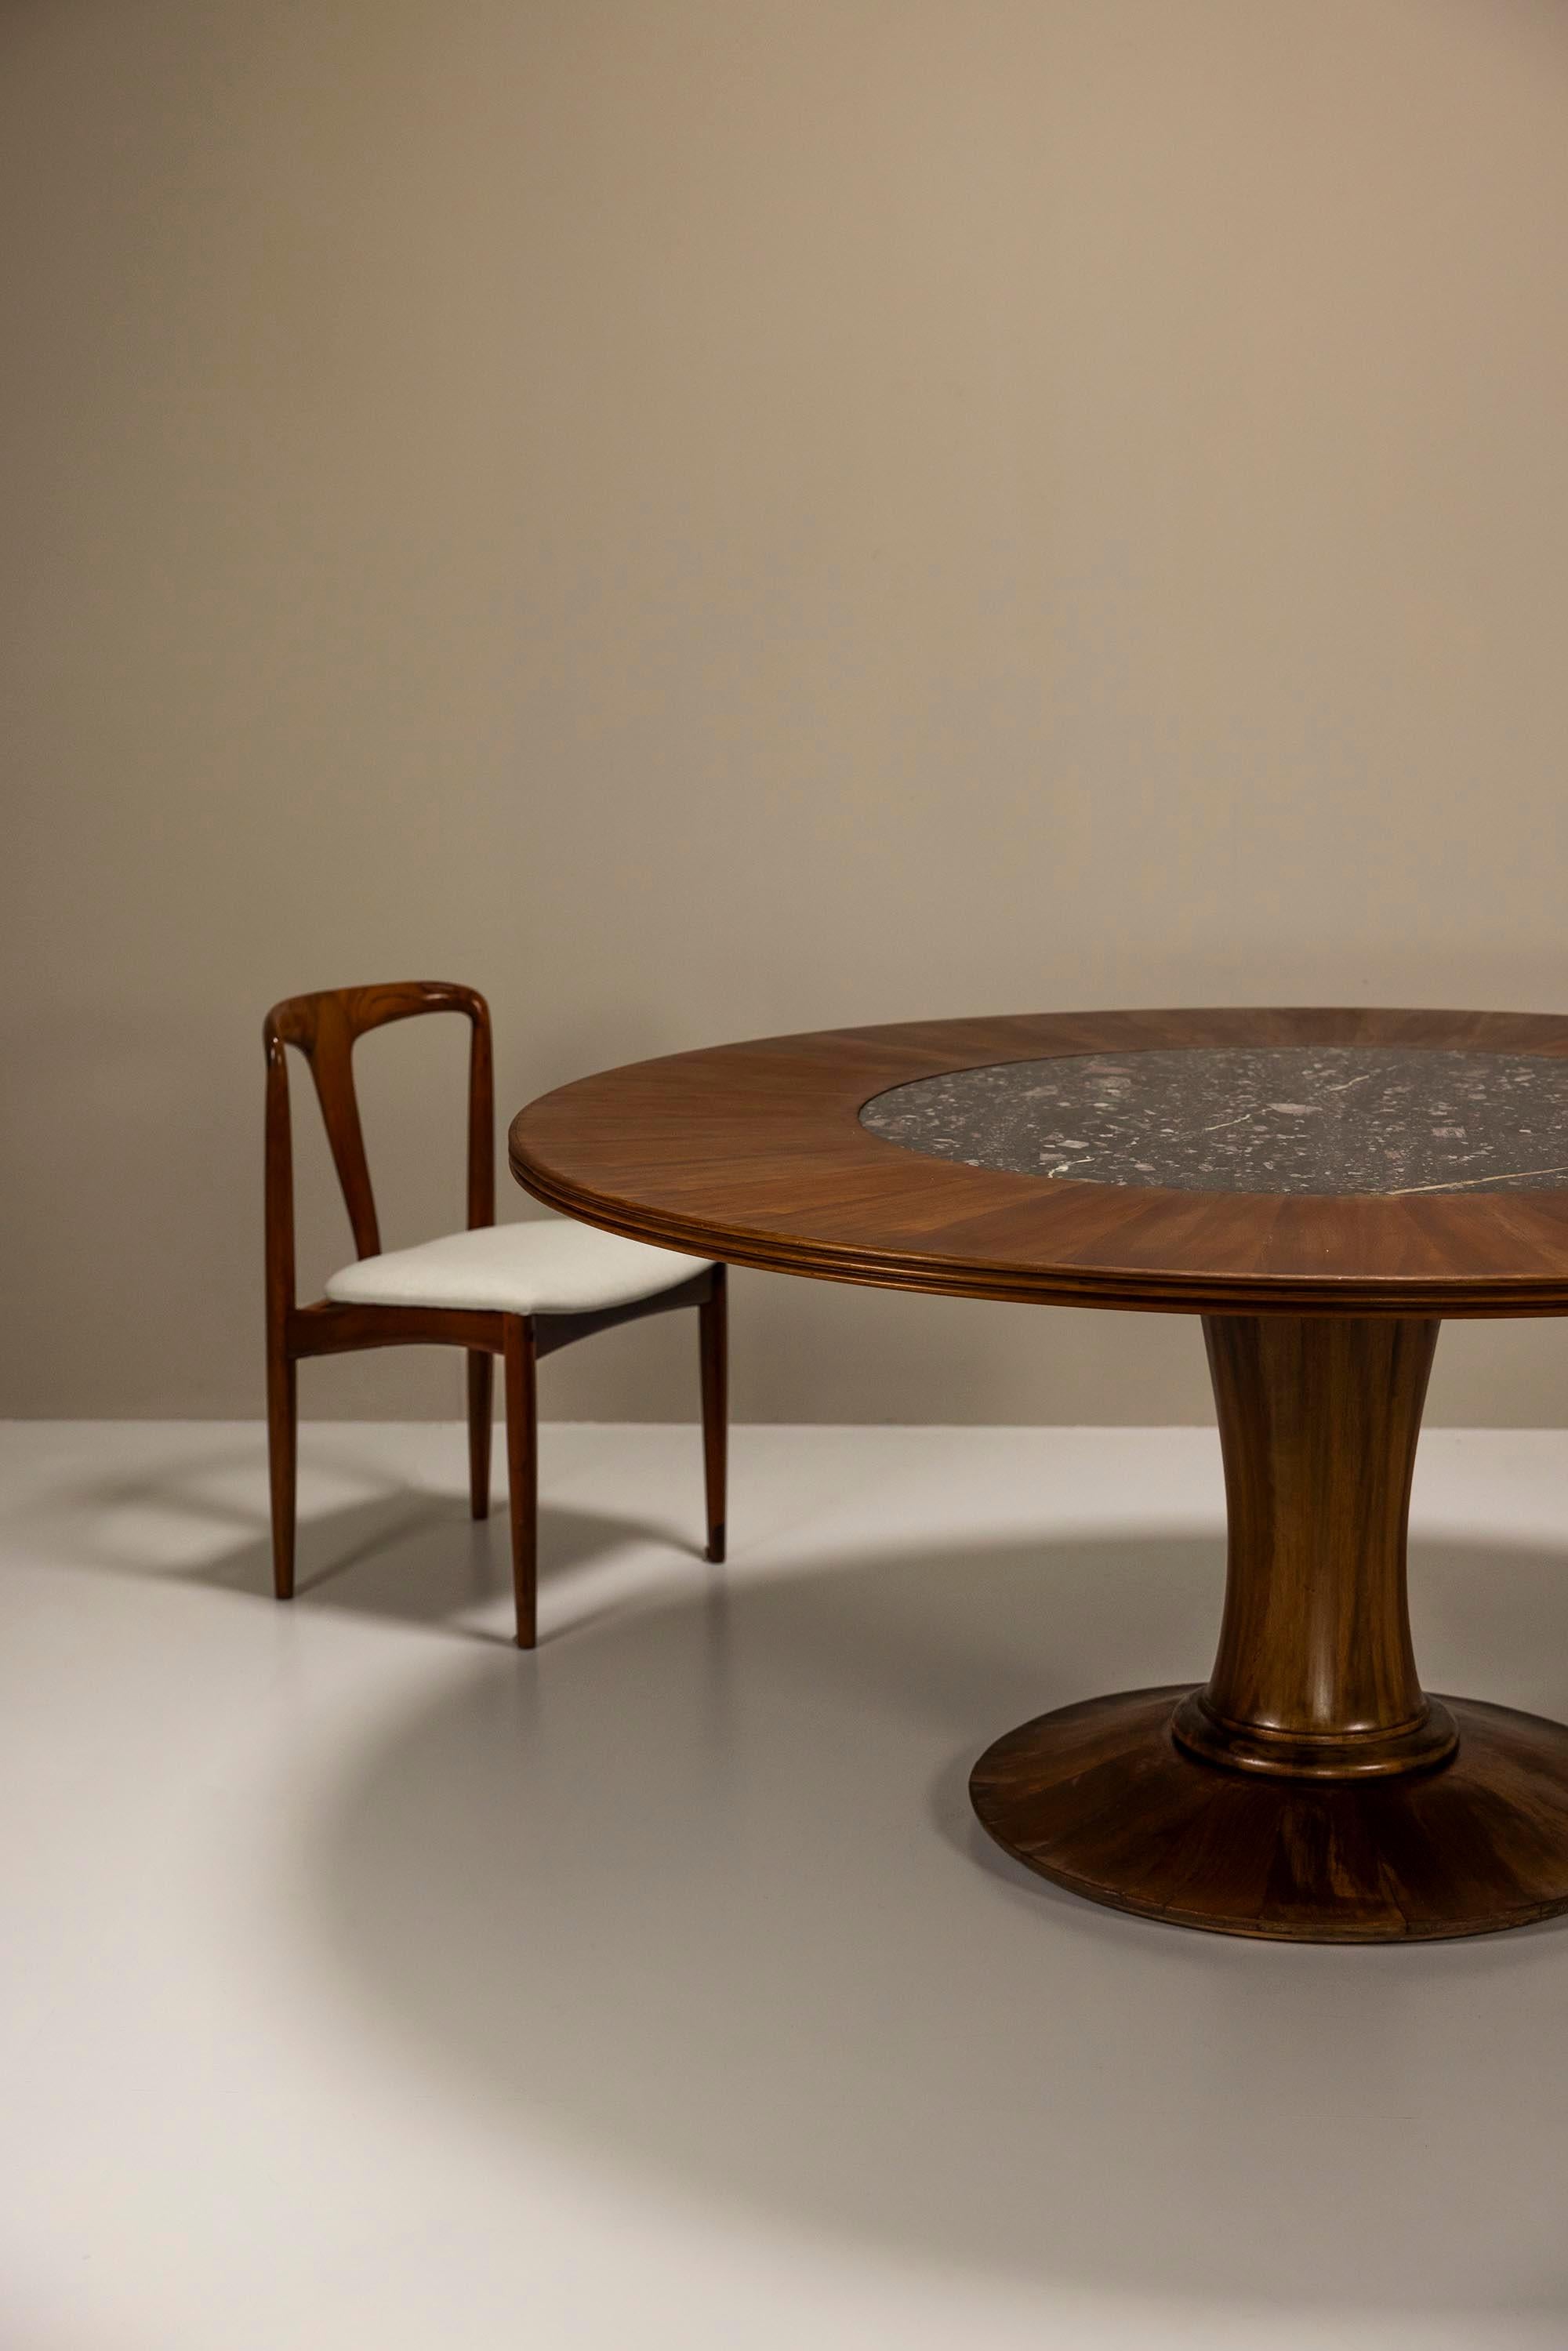 Mid-20th Century Round Dining Table In Mahogany And Terrazzo, Italy 1950's For Sale